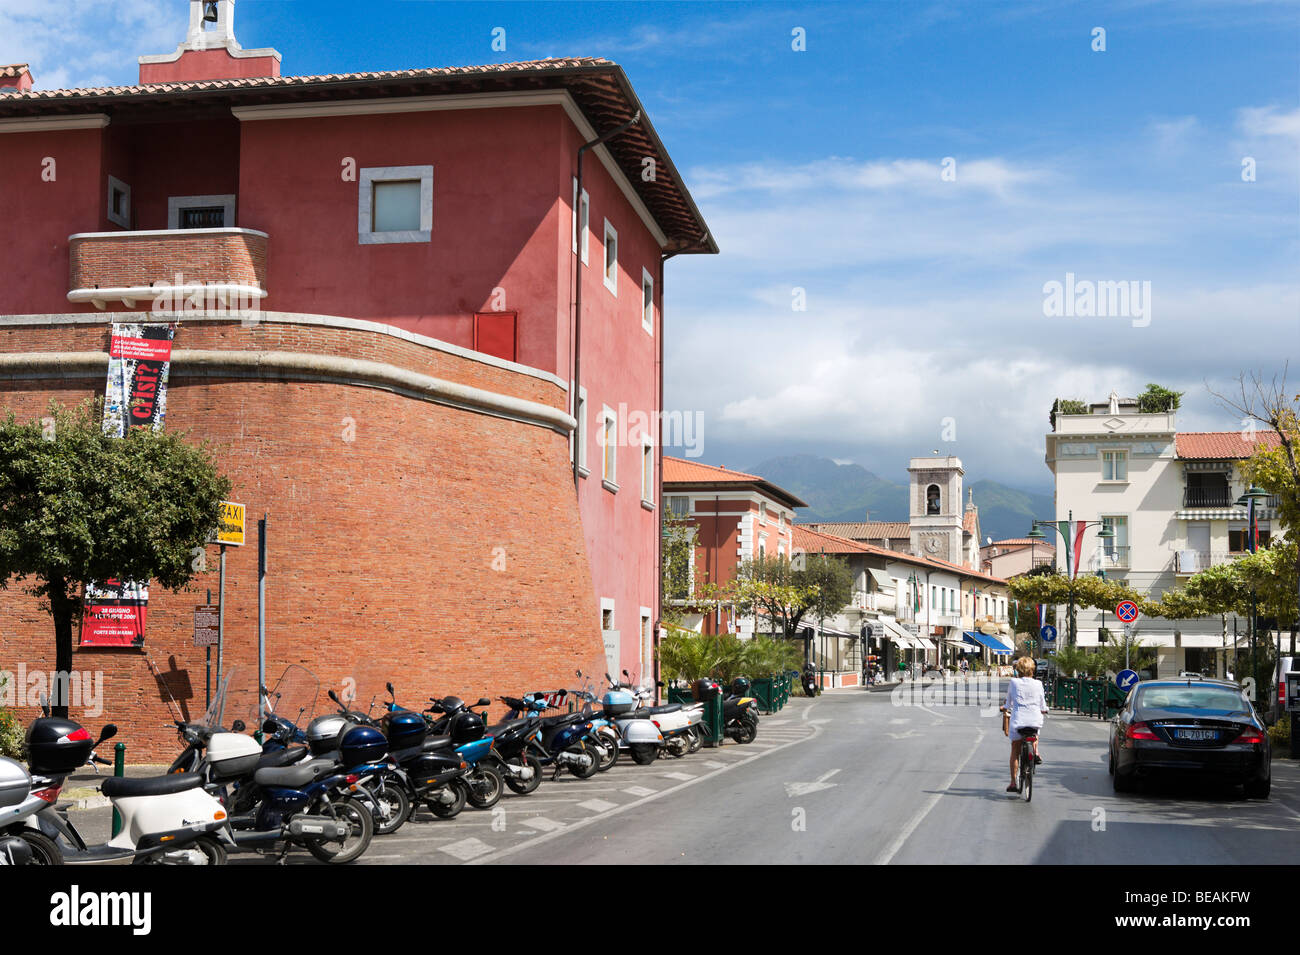 The main street and 'Fort' in the town centre, Forte dei Marmi, Tuscan Riviera, Tuscany, Italy Stock Photo